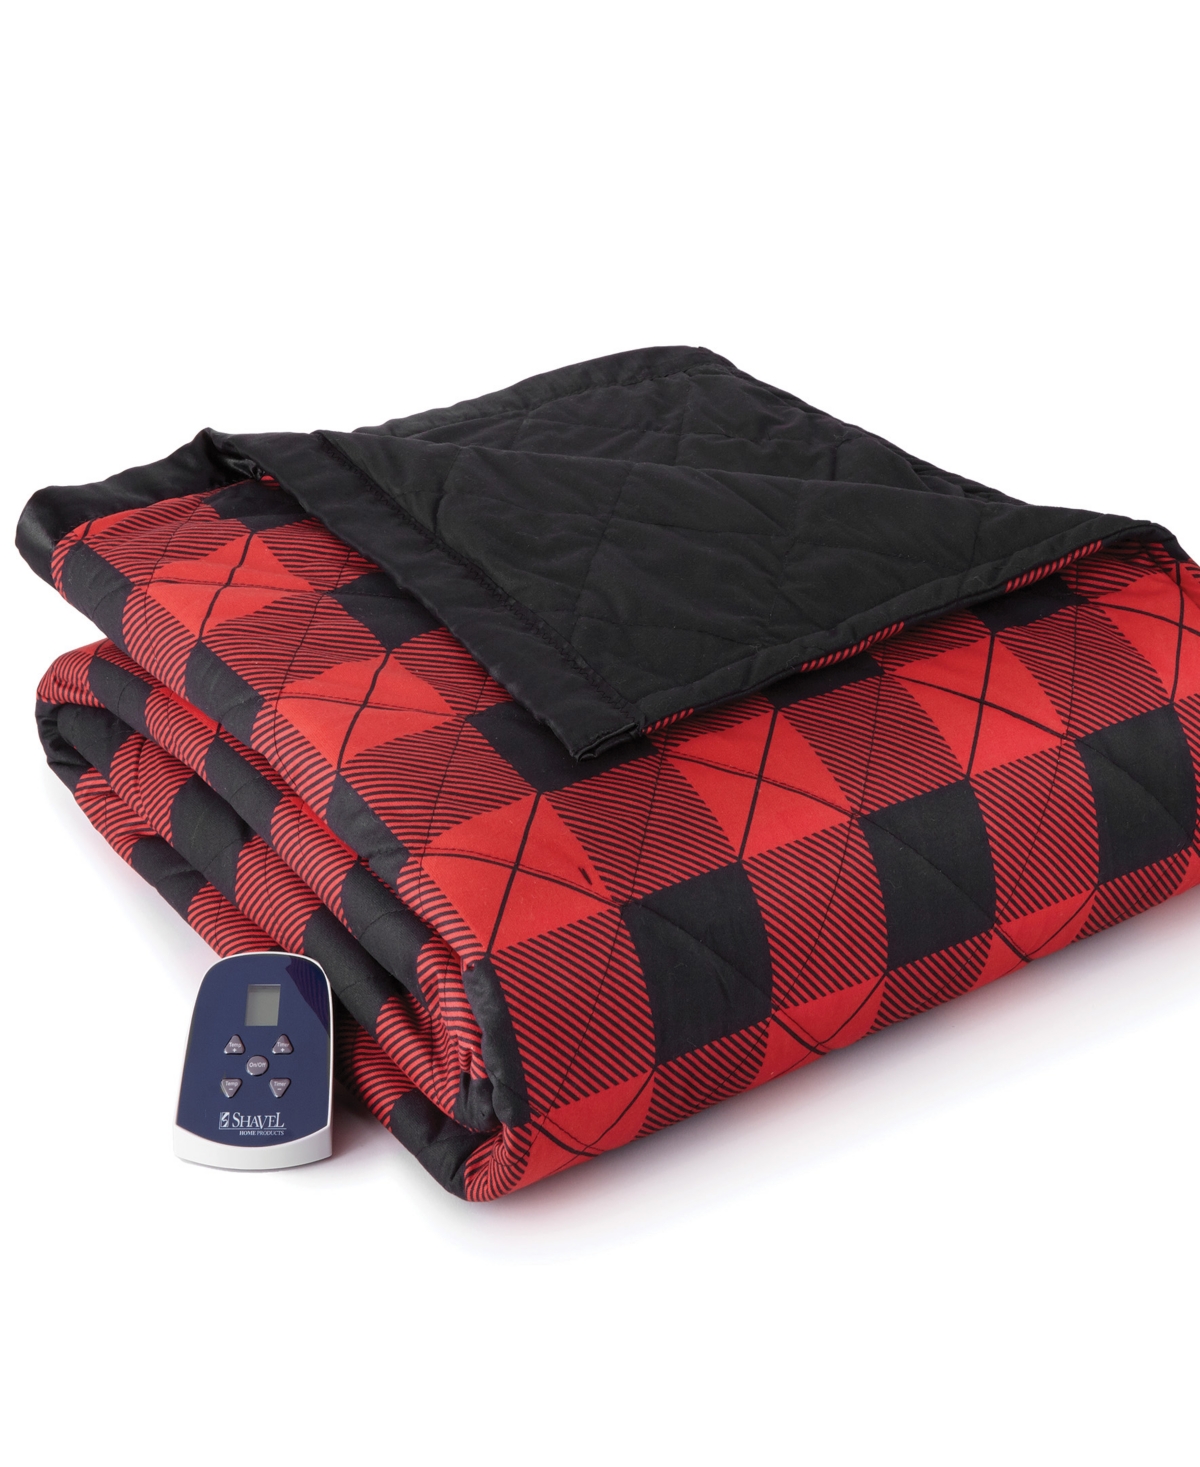 Shavel Micro Flannel 7 Layers Of Warmth Twin Electric Blanket In Buffalo Check Red